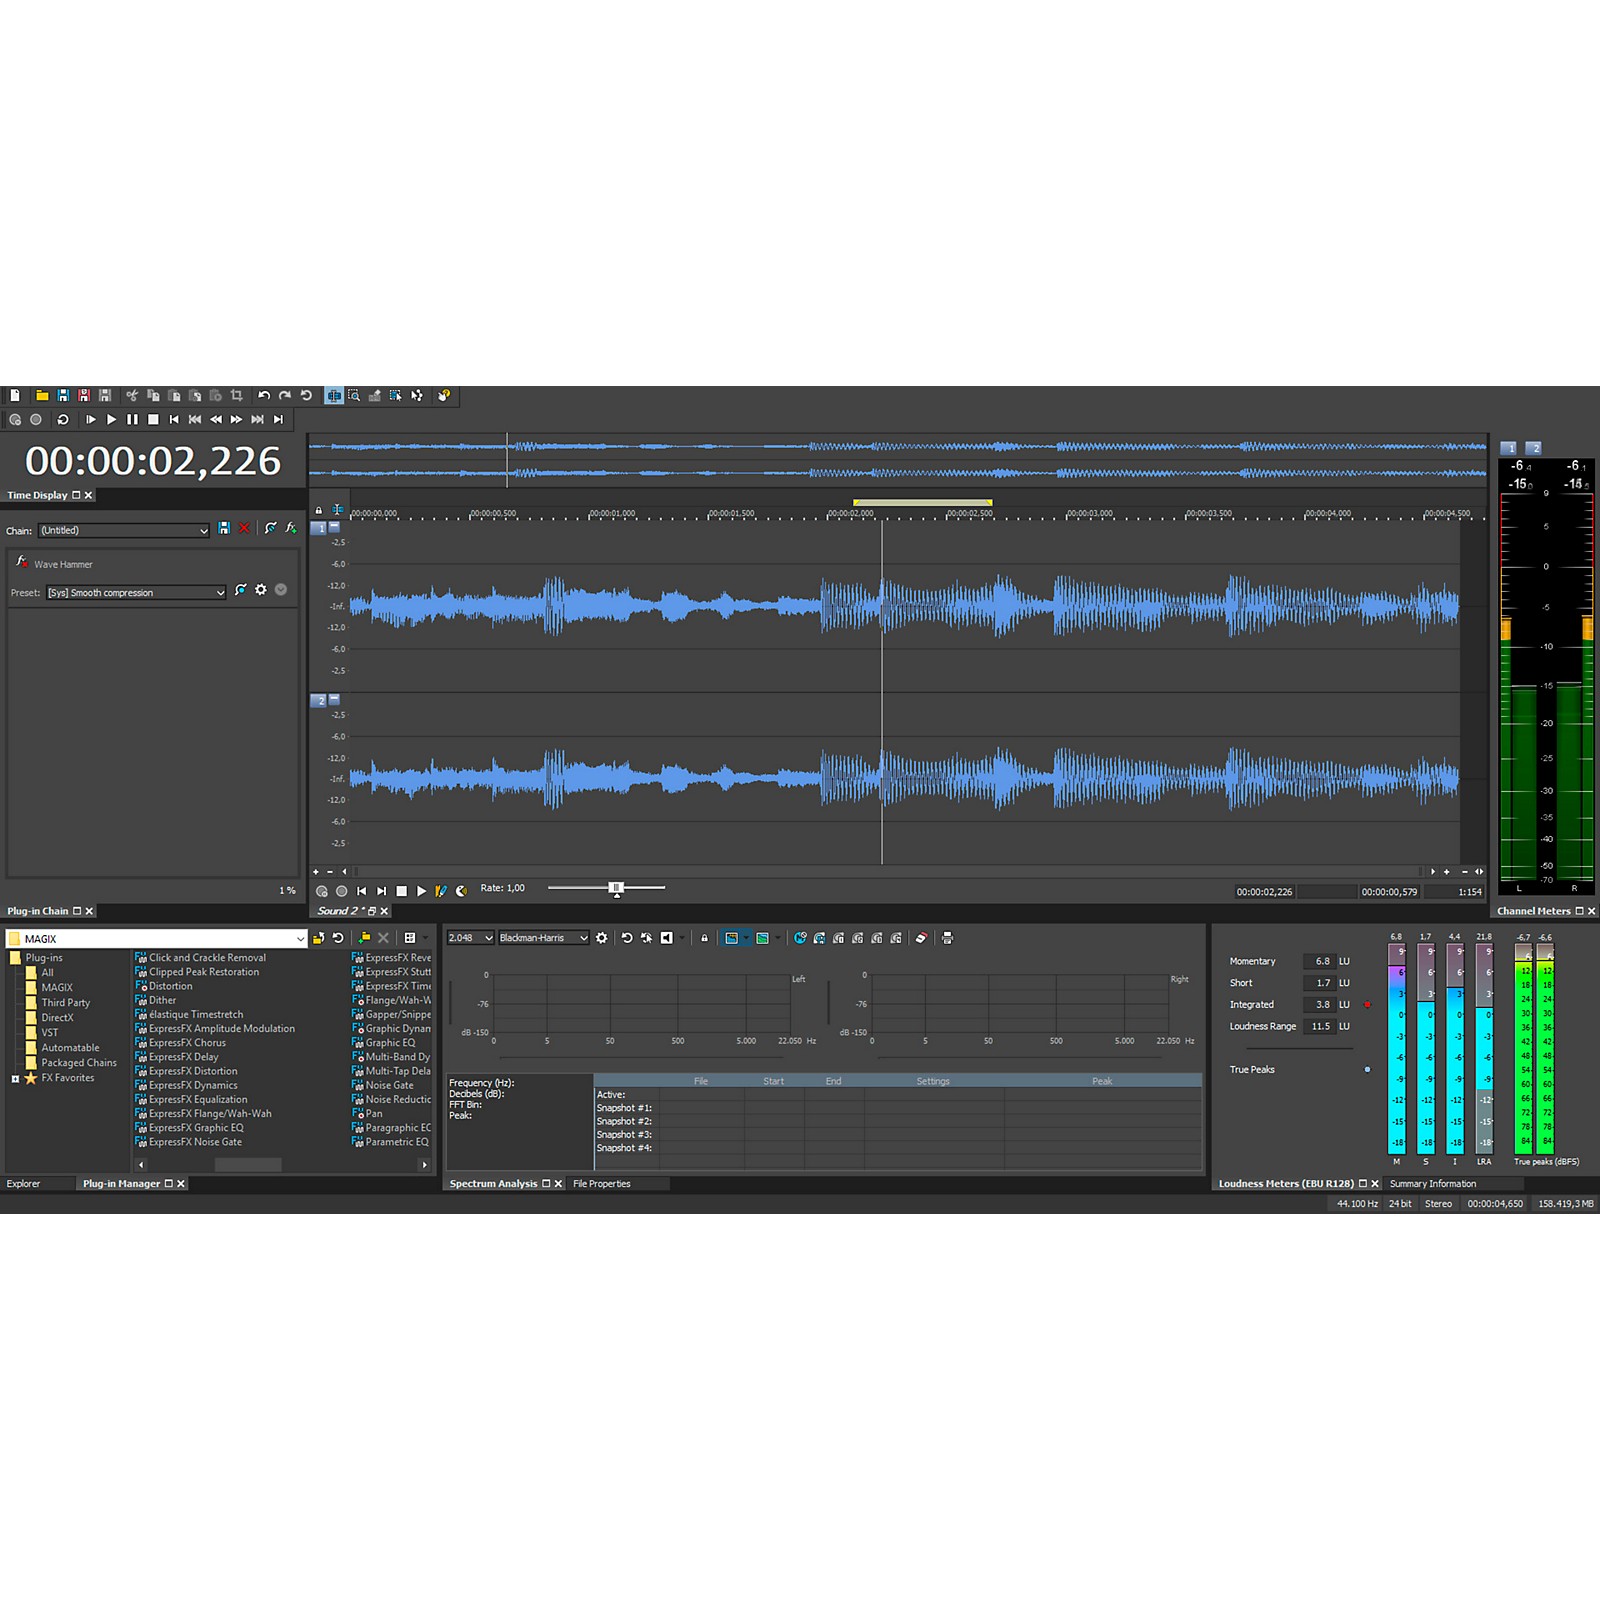 download the new MAGIX SOUND FORGE Pro Suite 17.0.2.109